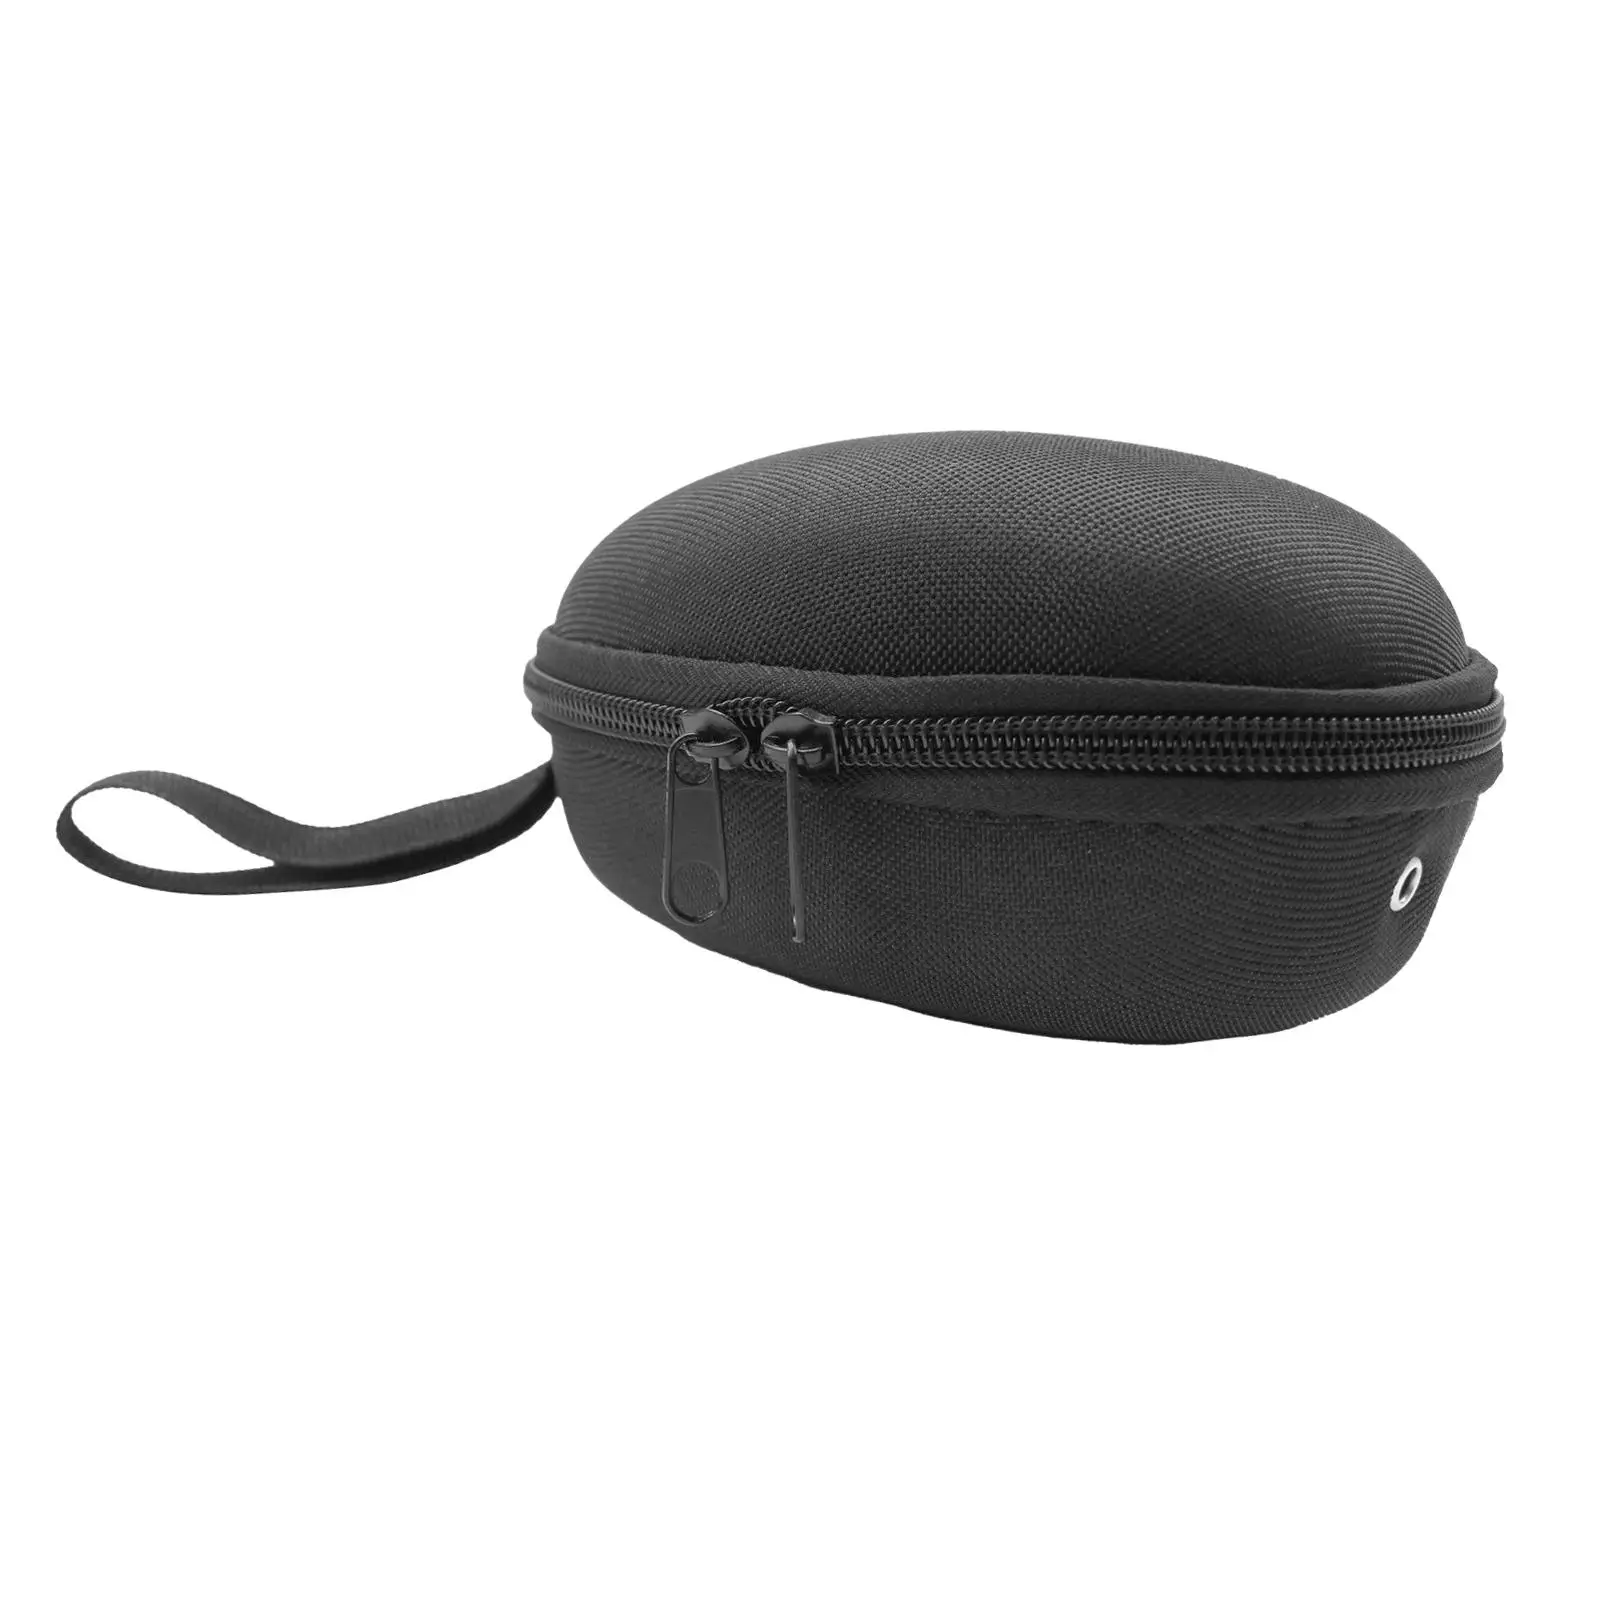 Fishing Reel Bag Fishing Gear Organizer Protective Case Durable for